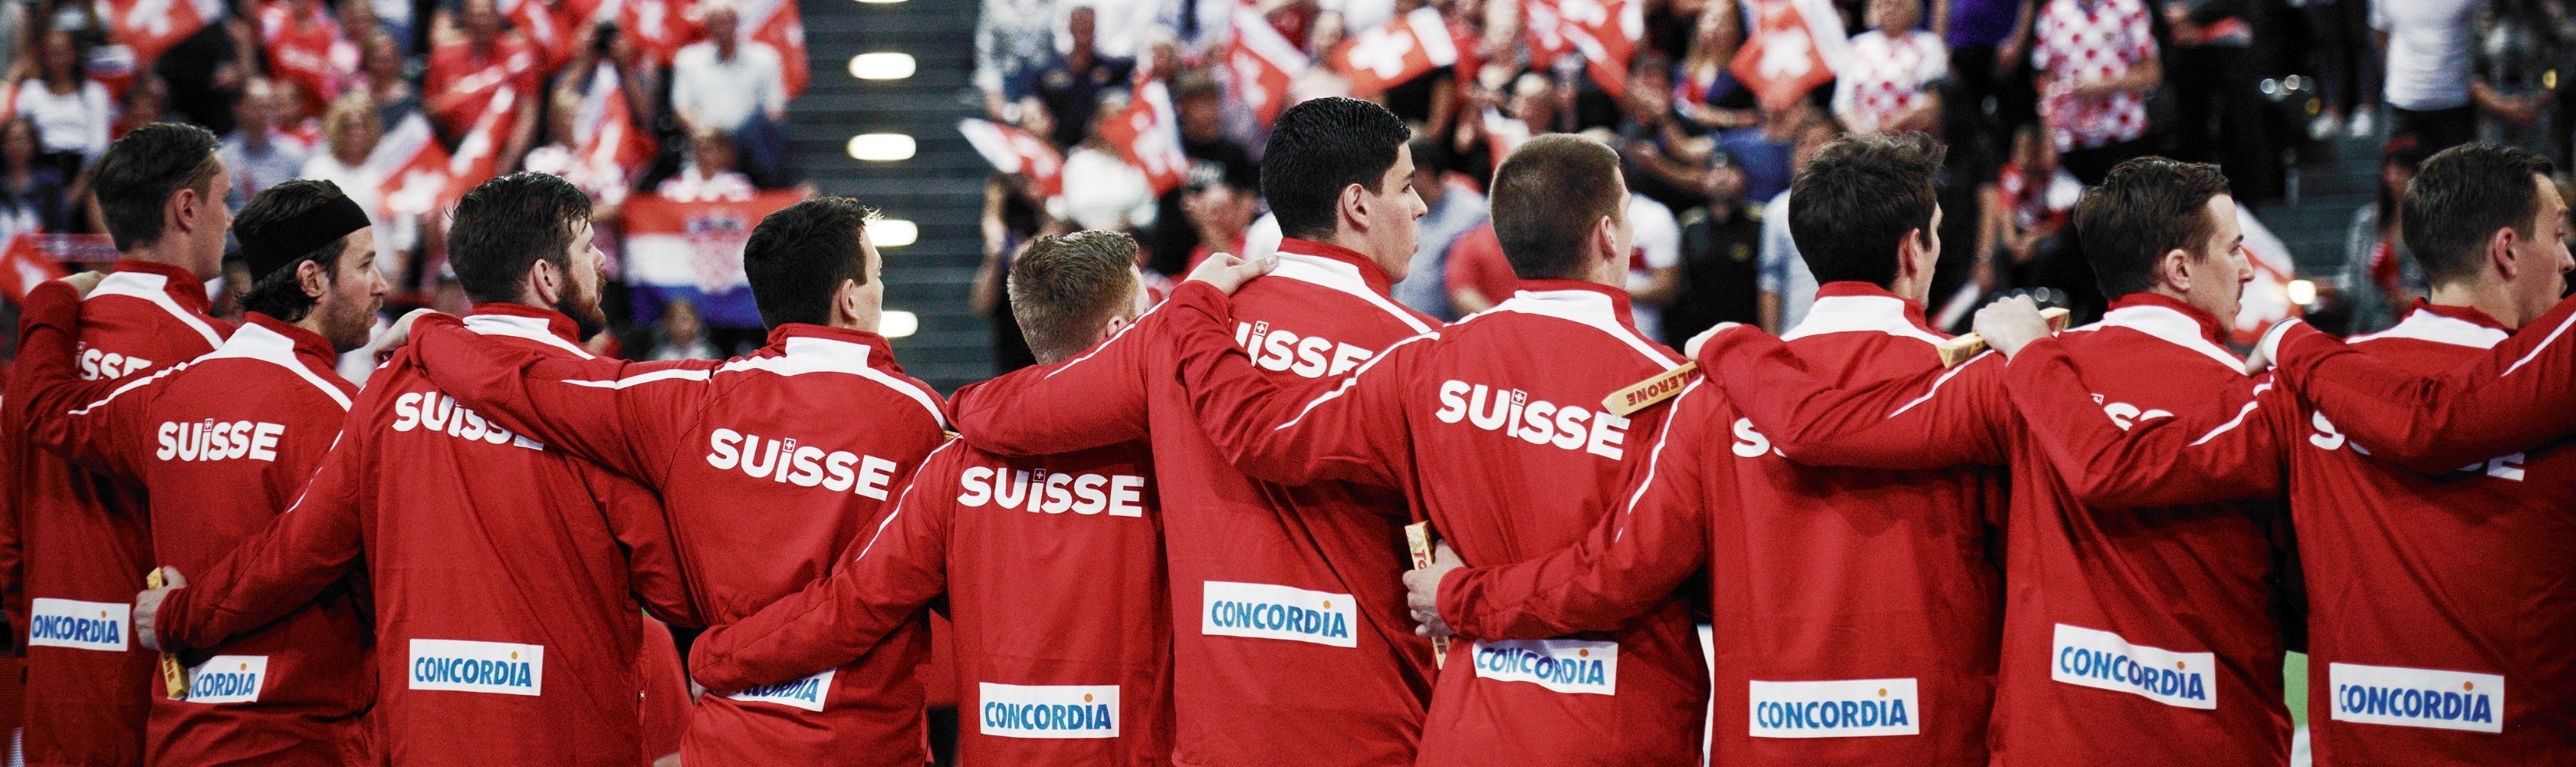 CONCORDIA is the official health and accident insurance provider of the Swiss Handball Association